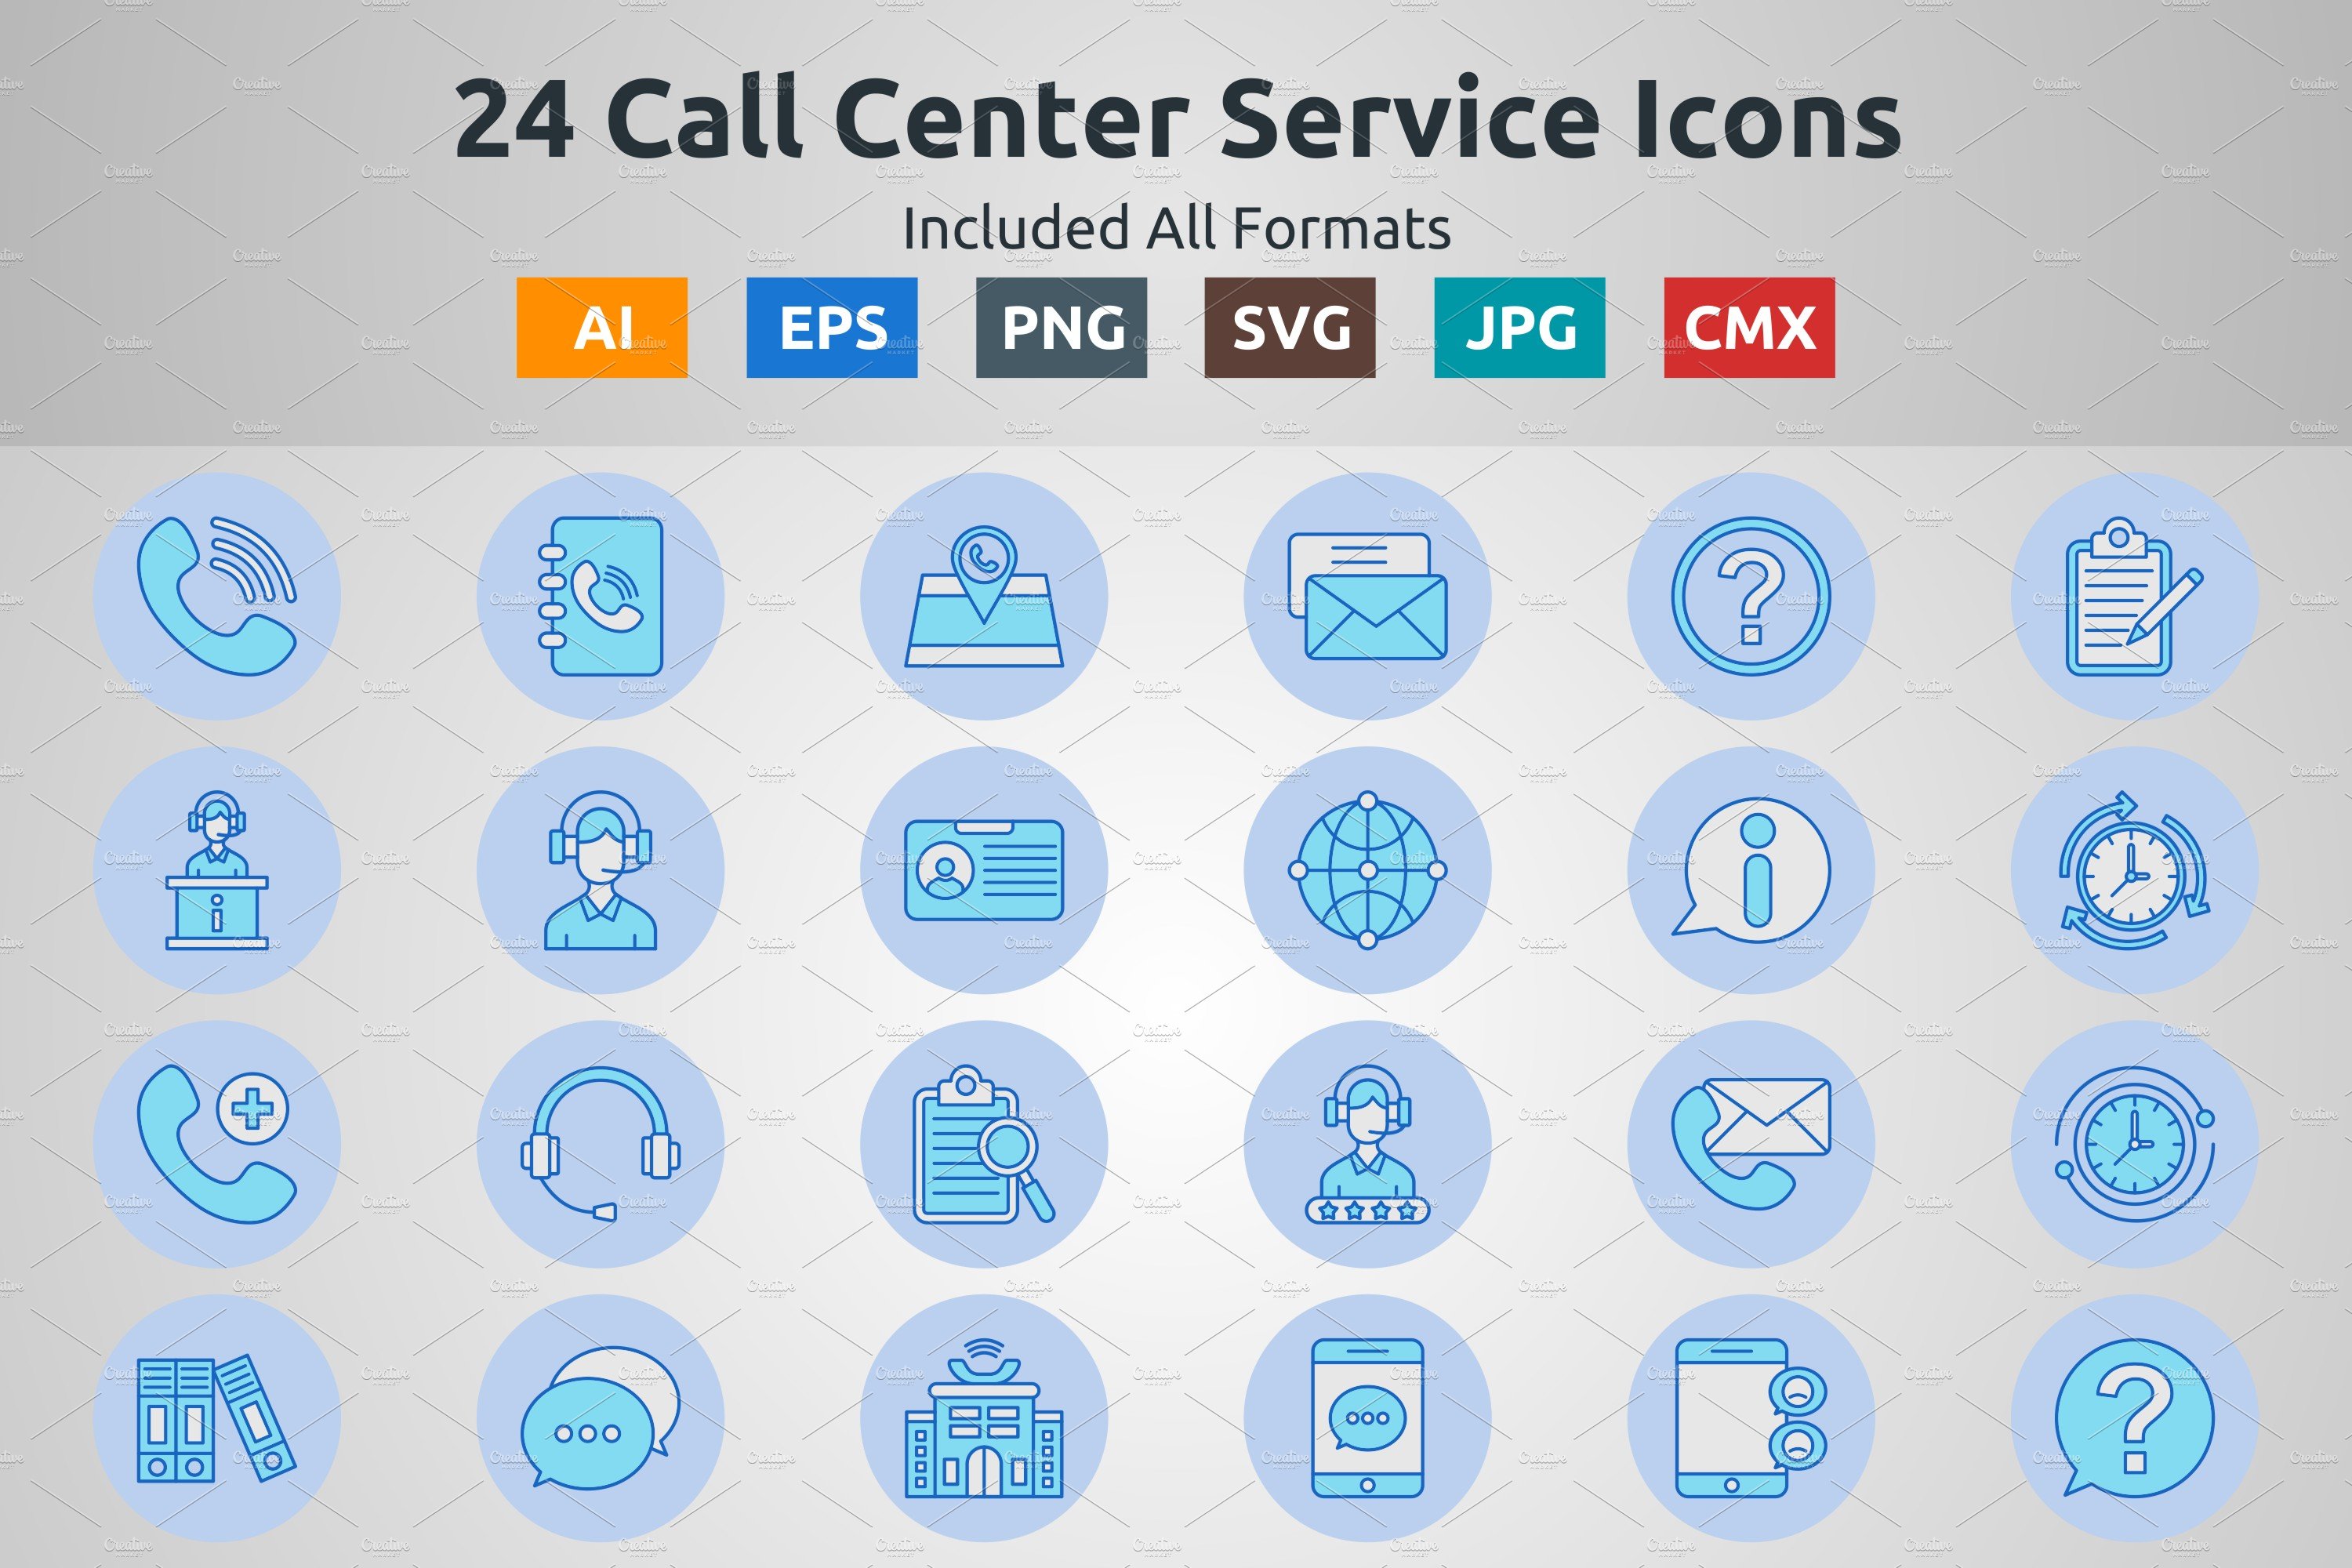 Blue Filled Circle Call Center Icons cover image.